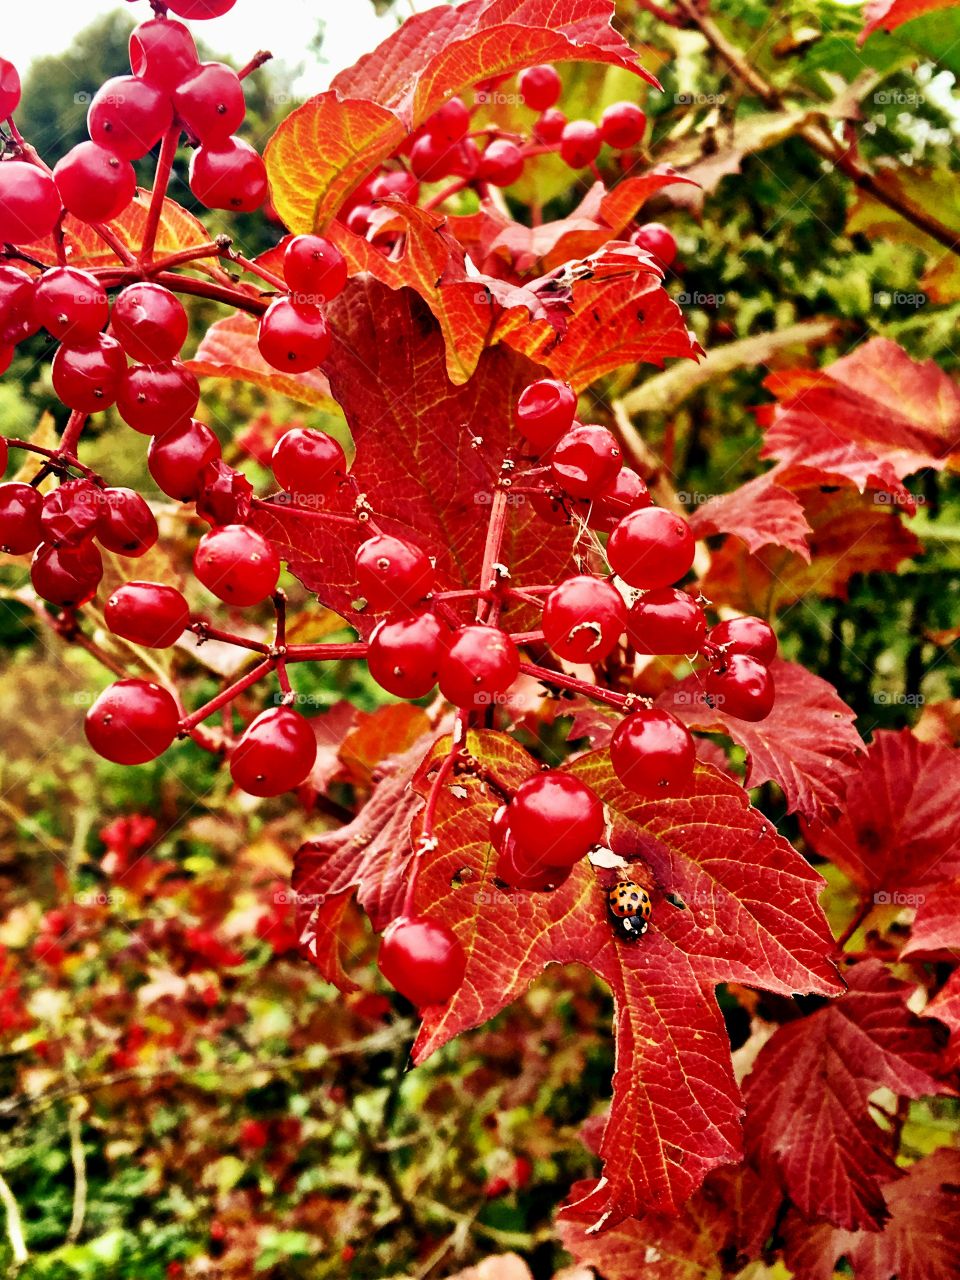 Red leaves, red berries, red ladybird